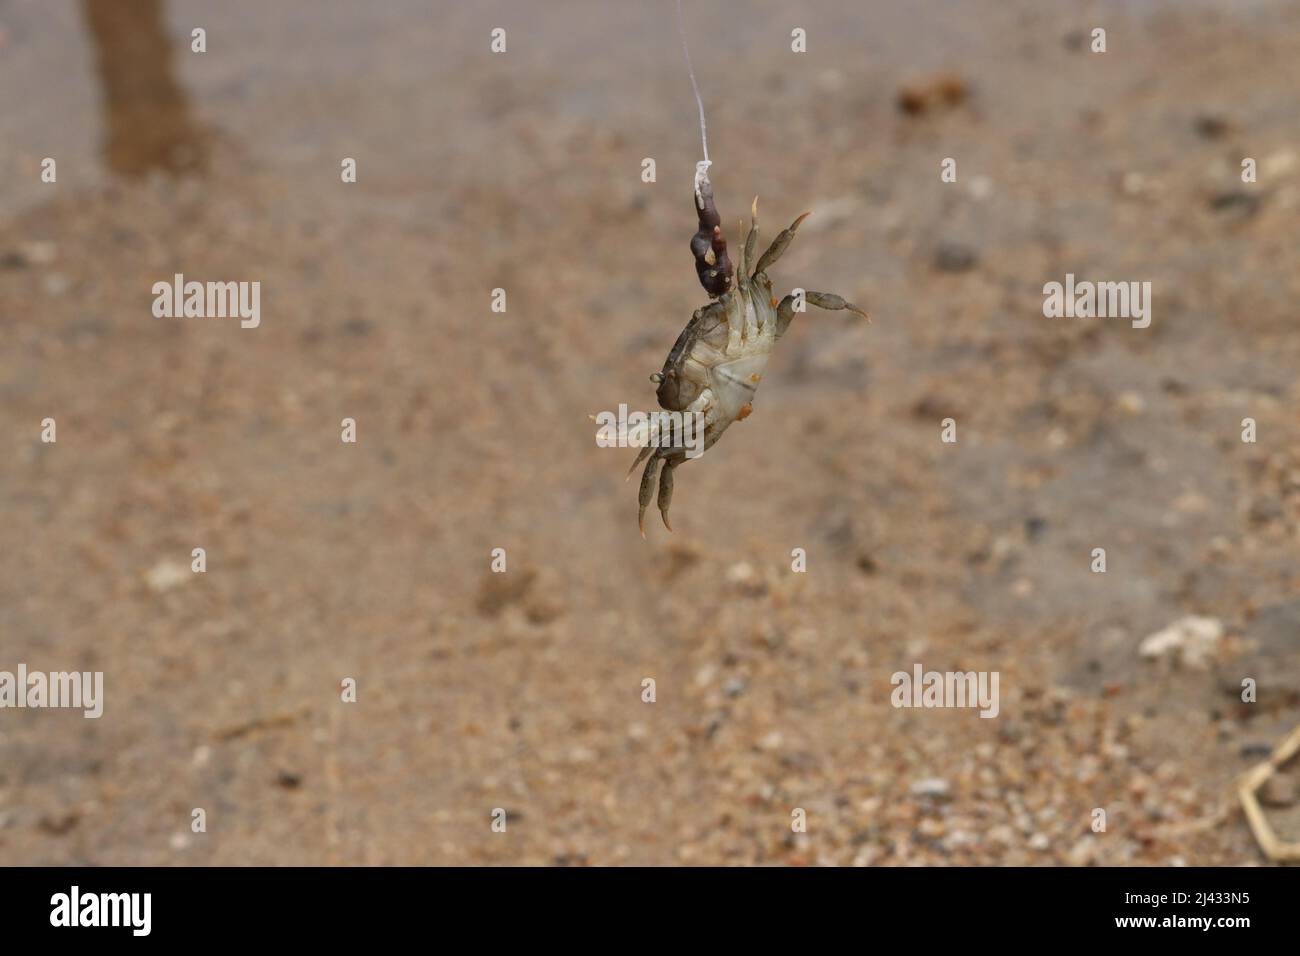 https://c8.alamy.com/comp/2J433N5/close-up-of-a-crab-picks-up-and-hanging-on-the-fishing-hook-worm-with-its-claw-while-a-village-boy-fishing-in-the-river-2J433N5.jpg